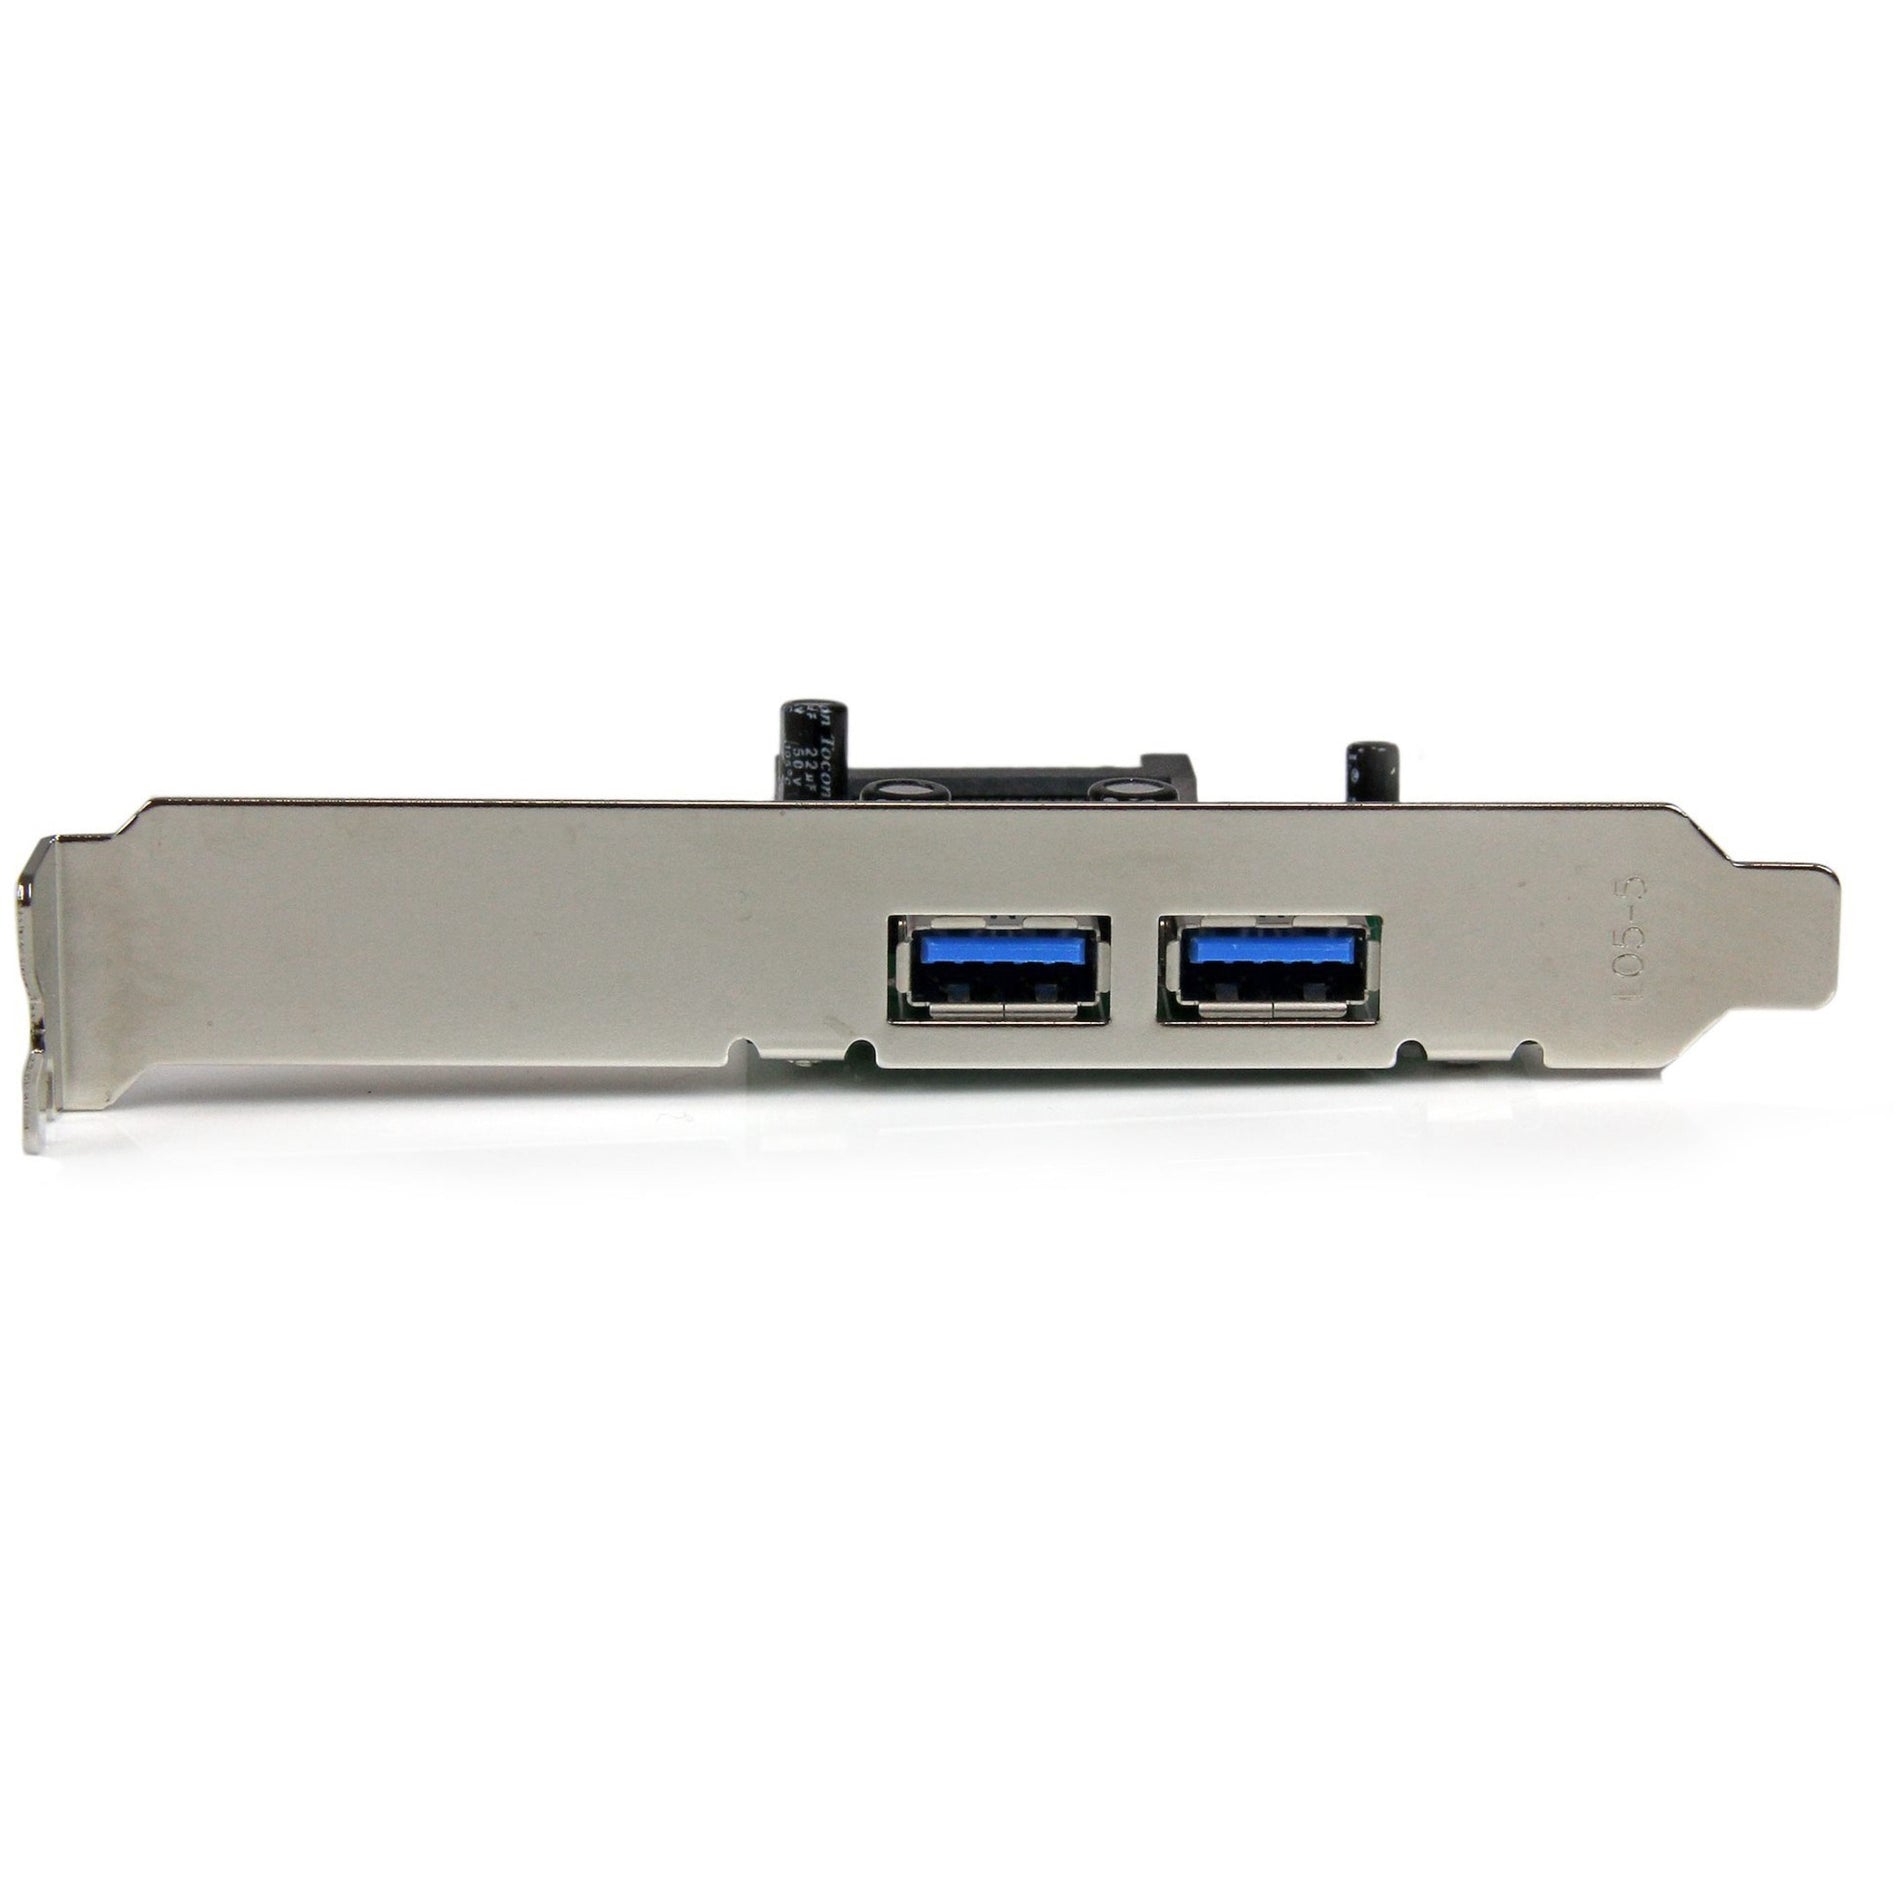 StarTech.com PEXUSB3S24 2 Port PCI Express (PCIe) SuperSpeed USB 3.0 Card Adapter with UASP - SATA Power, High-Speed Data Transfer and Power for Your PC